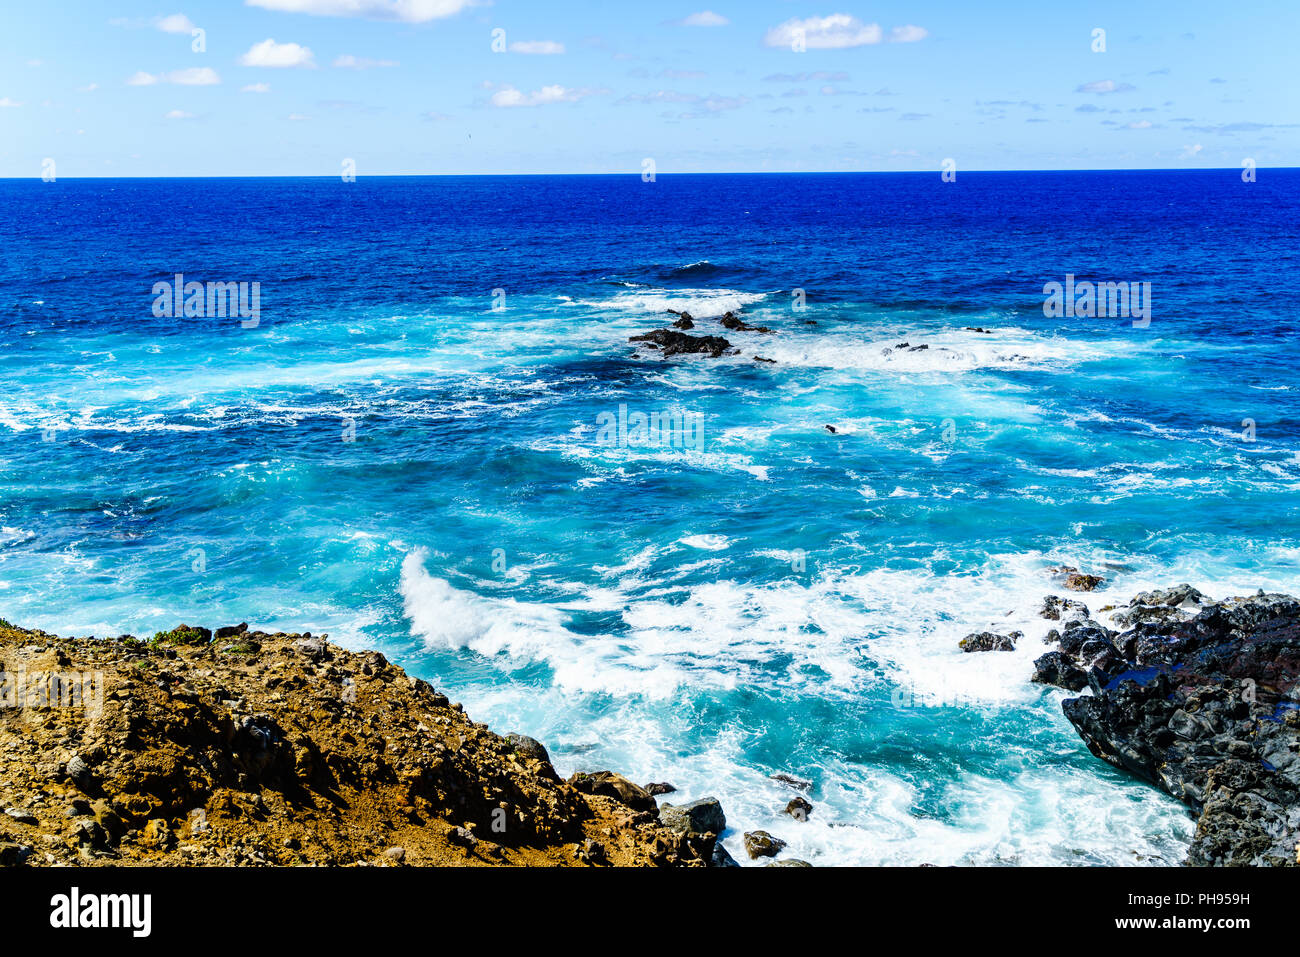 Waves of the South Pacific Ocean Stock Photo